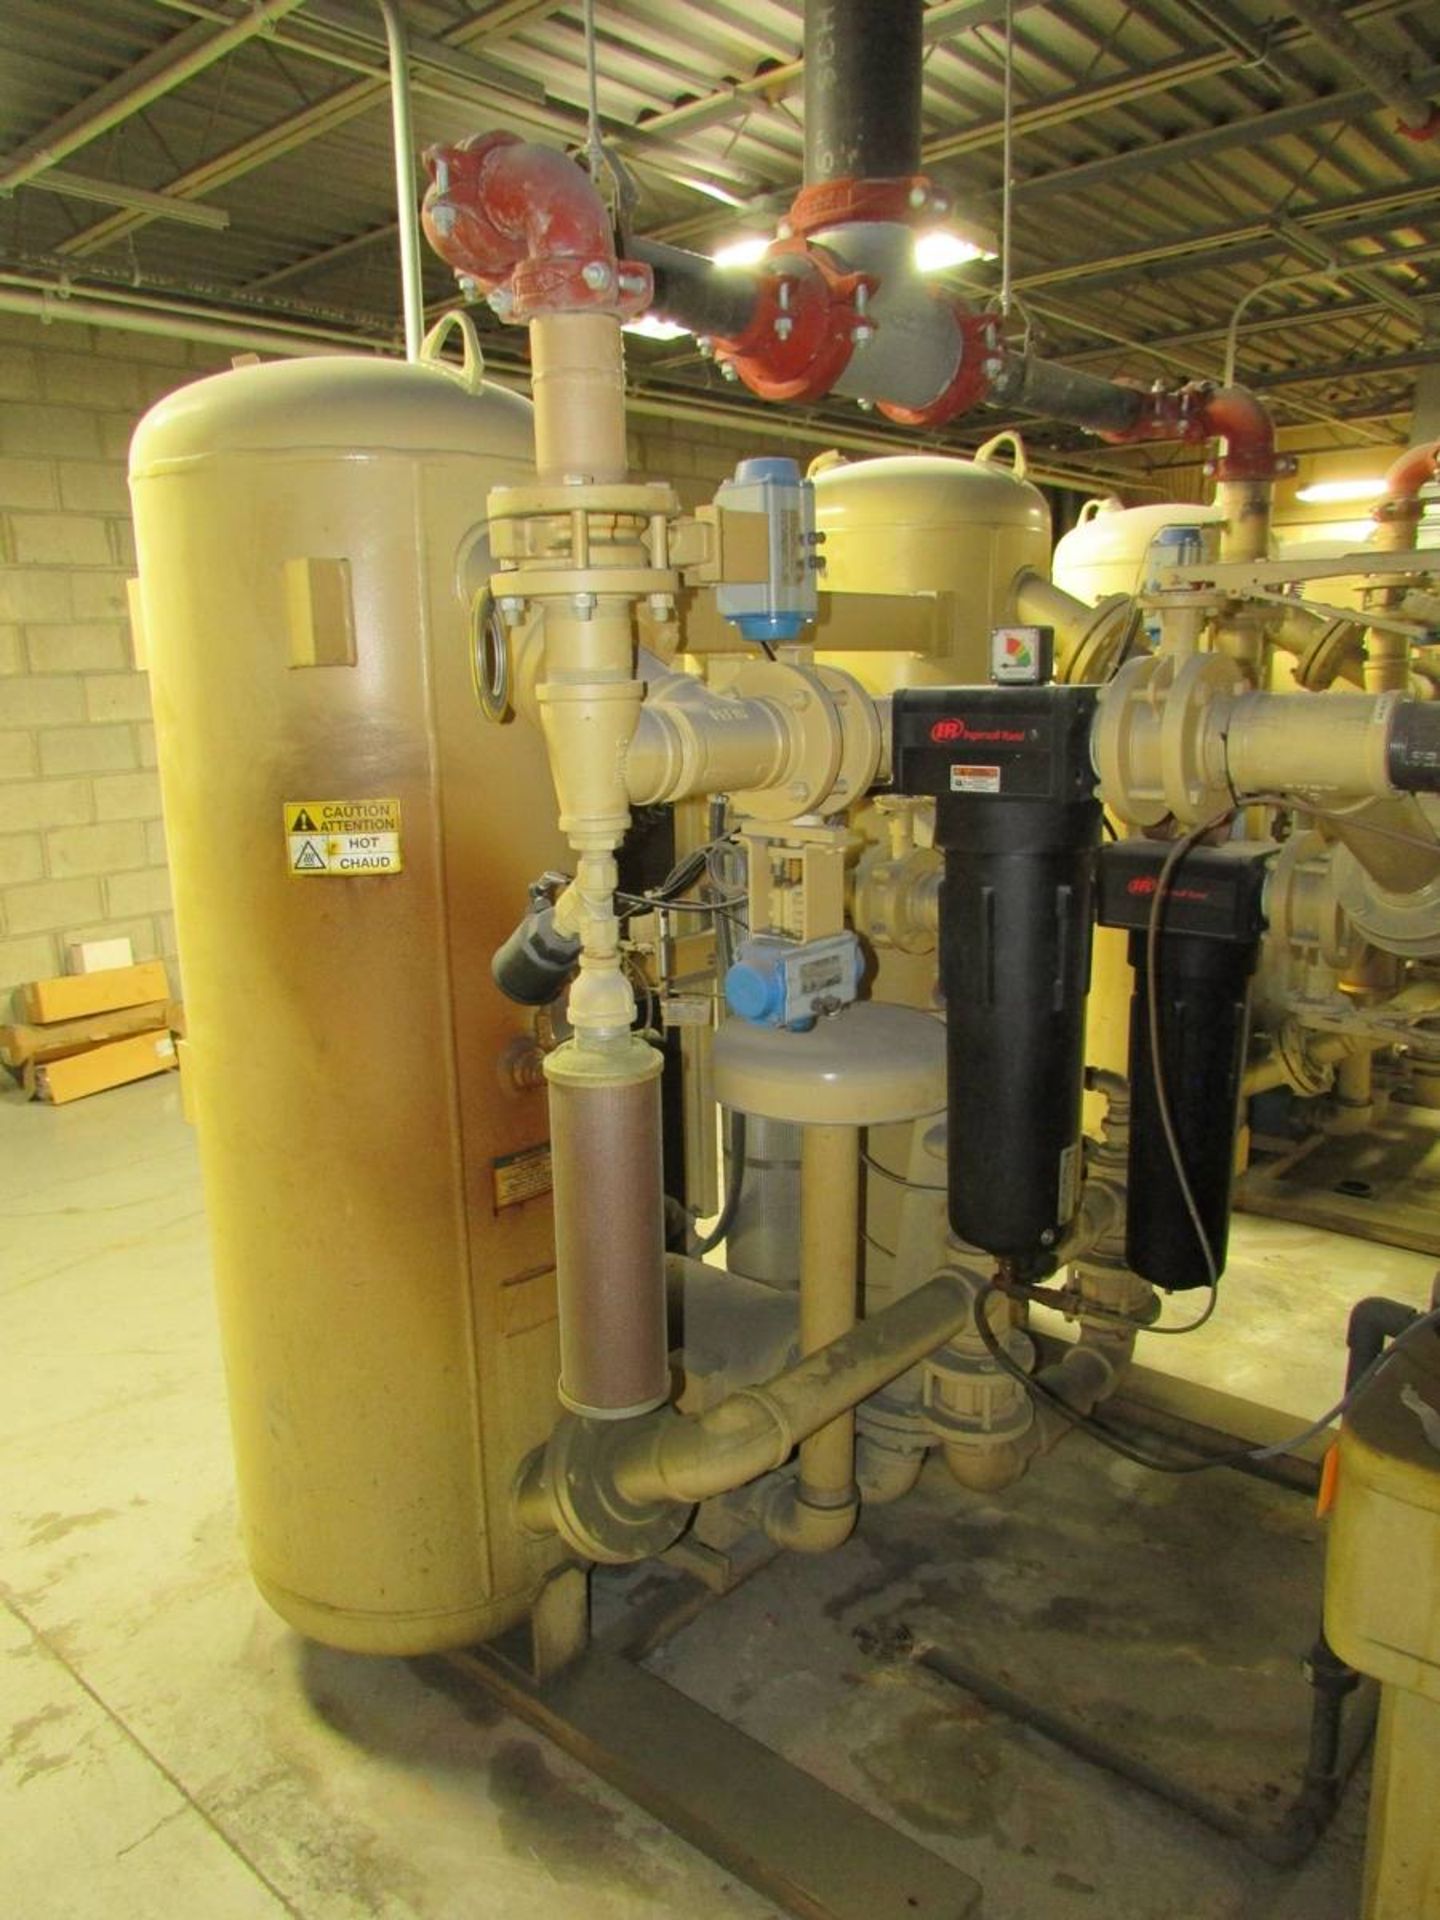 Ingersoll Rand HB10004HN00H Heated Blower Desiccant Air Dryer - Image 5 of 7